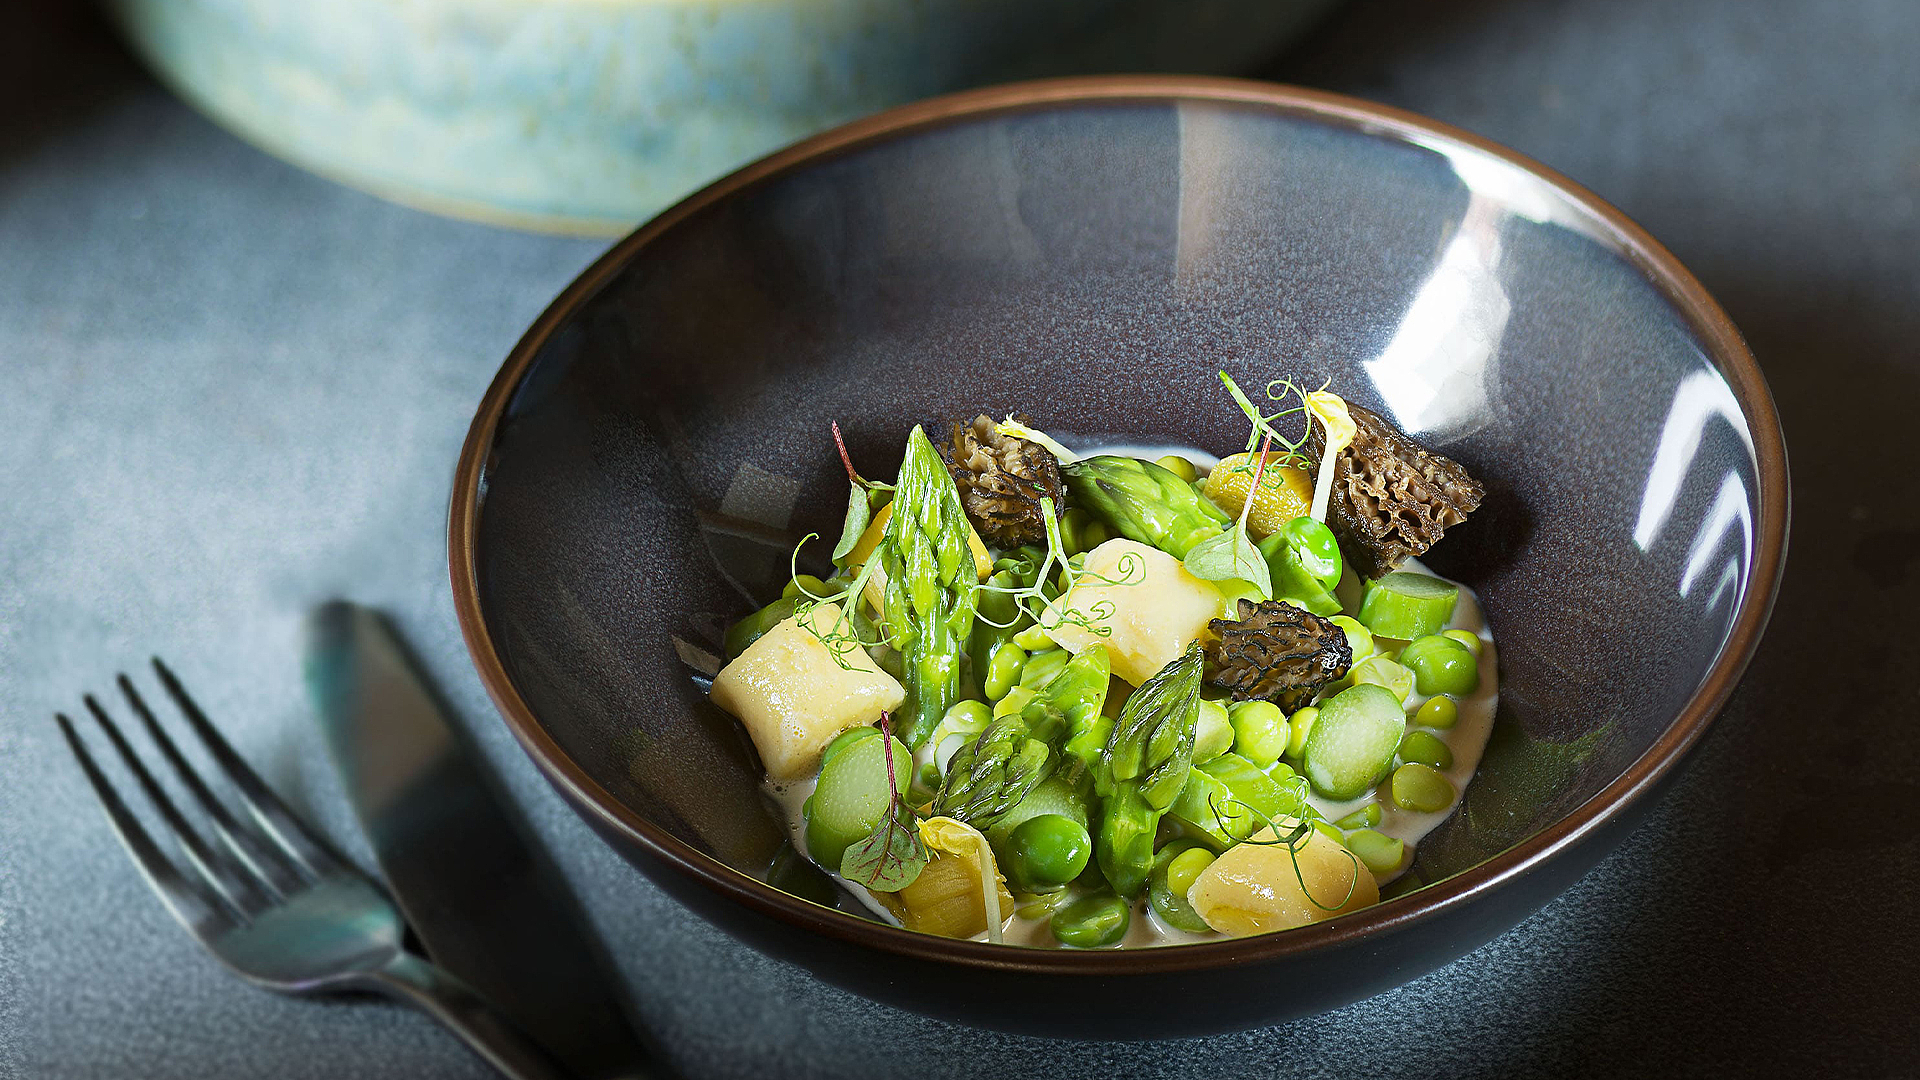 Gnocchi with green asparagus, roasted leek and morel cream sauce